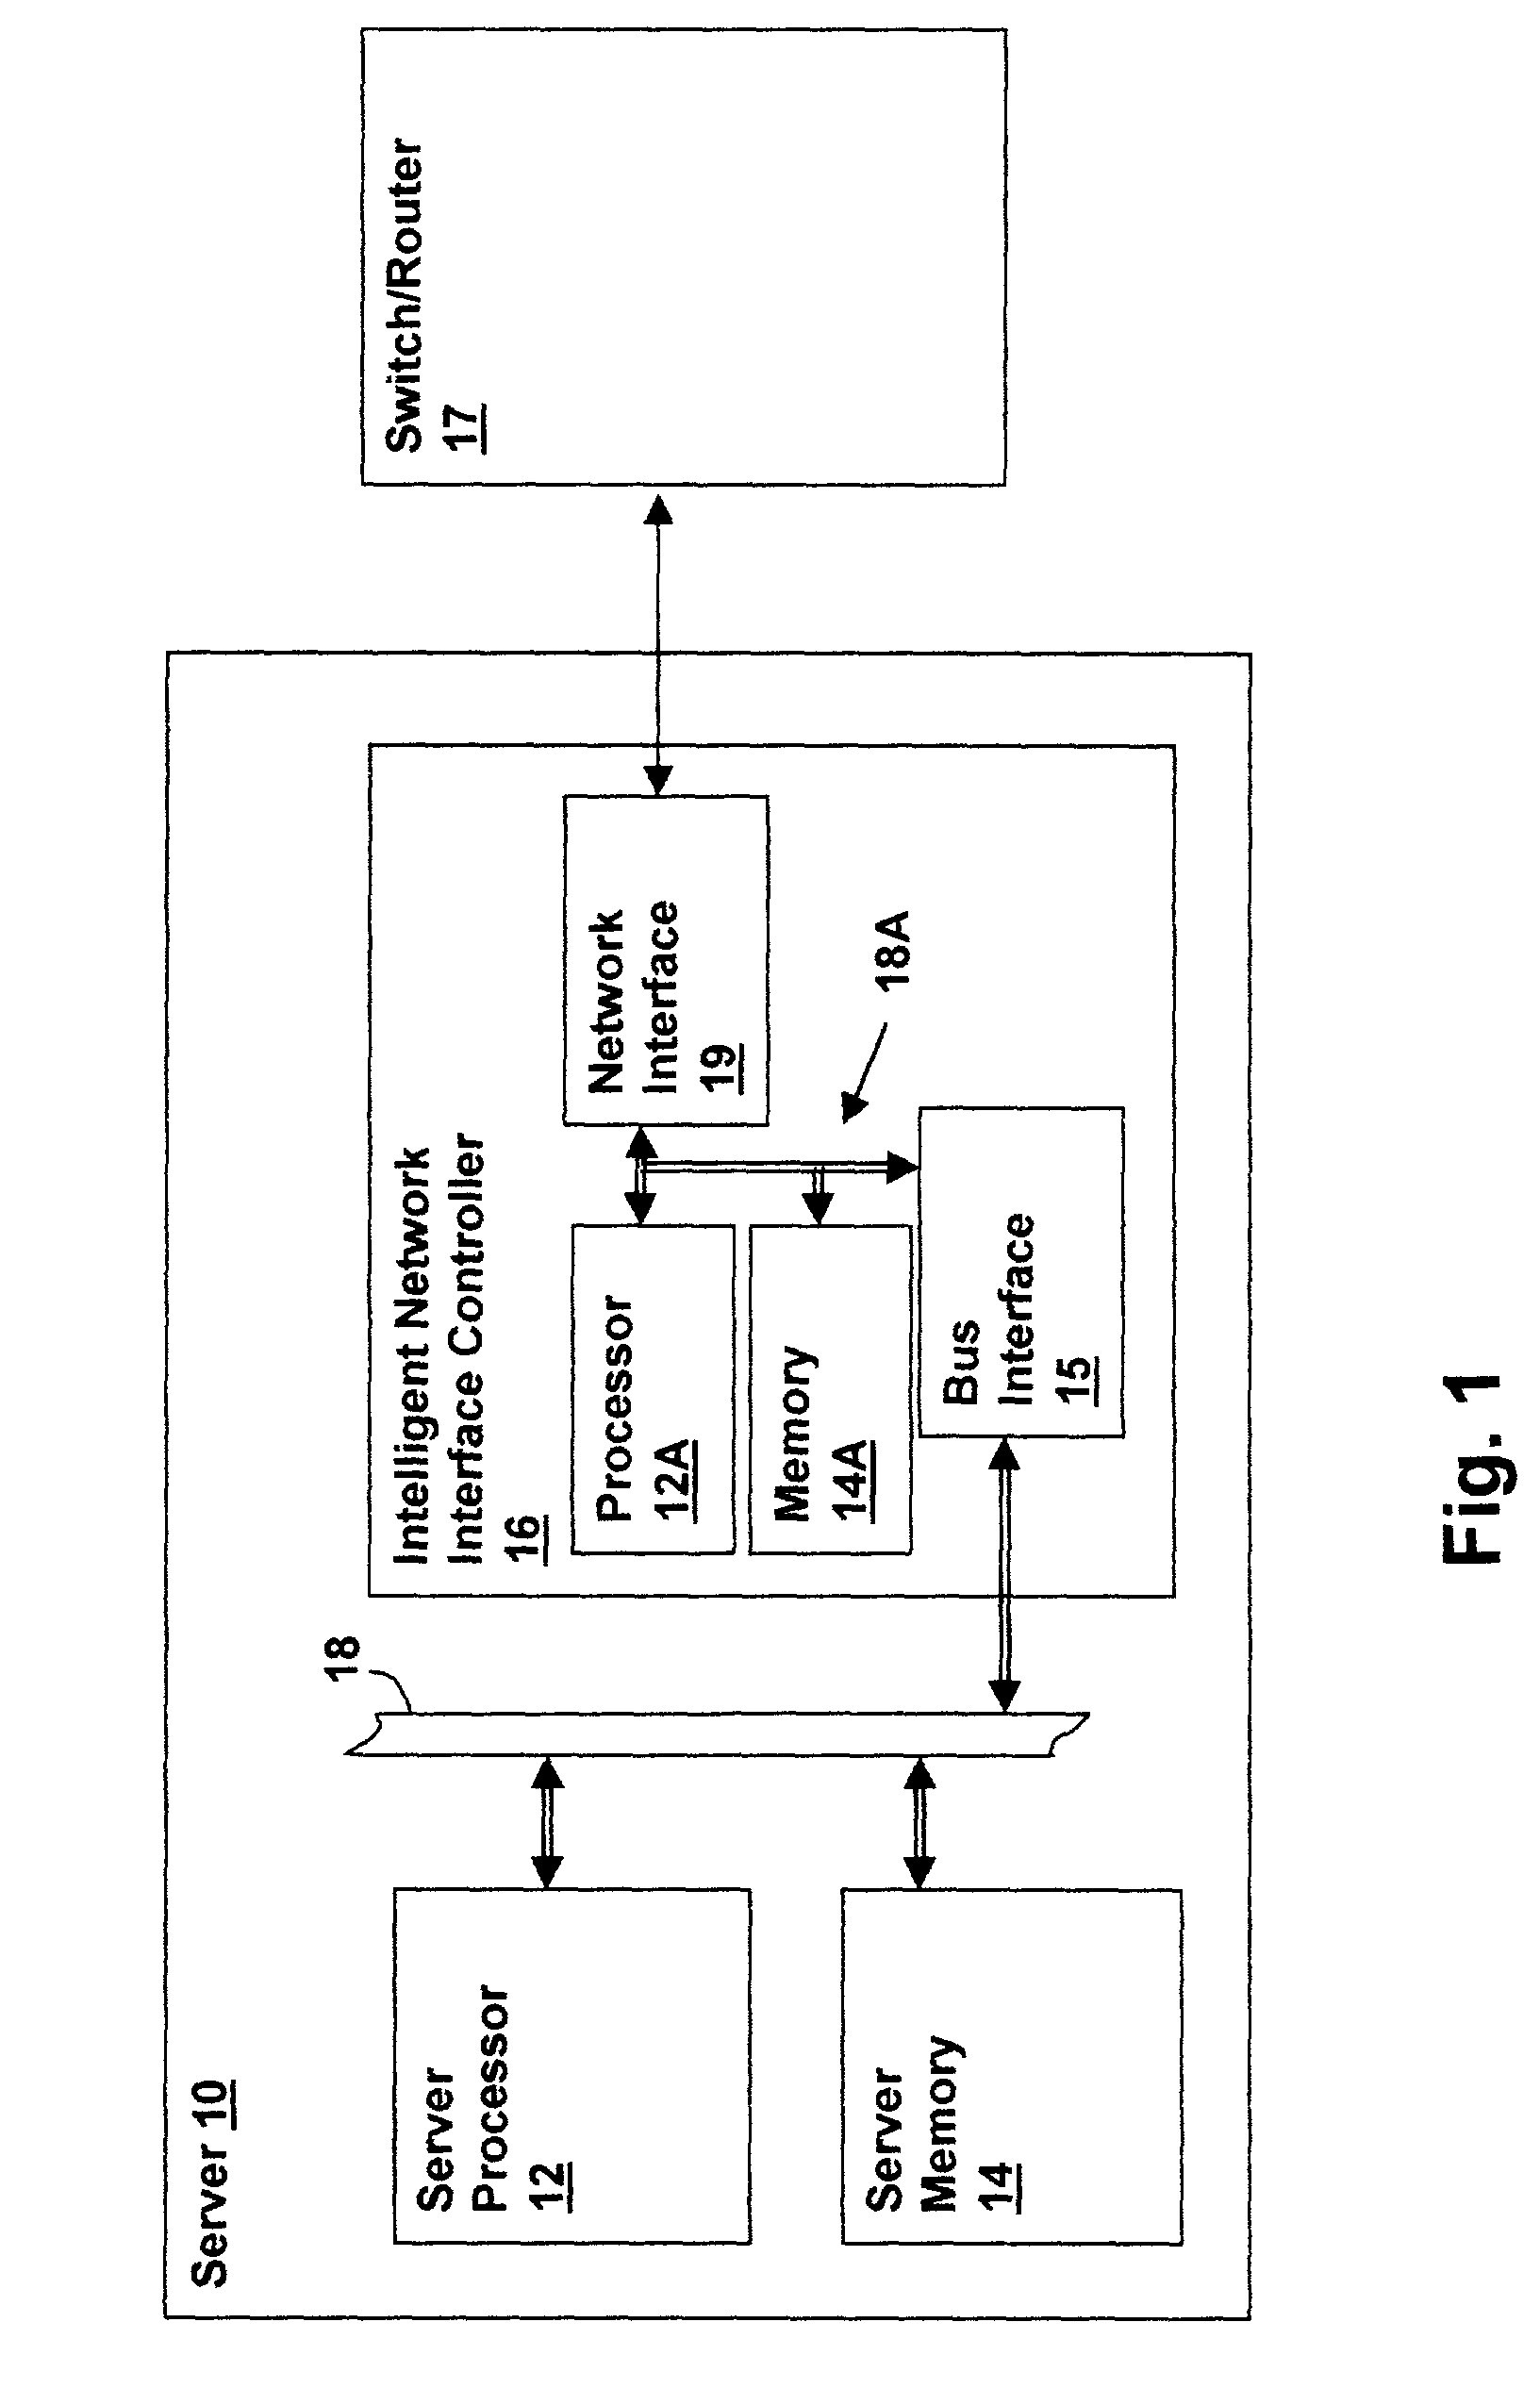 Method for server-directed packet forwarding by a network controller based on a packet buffer threshold